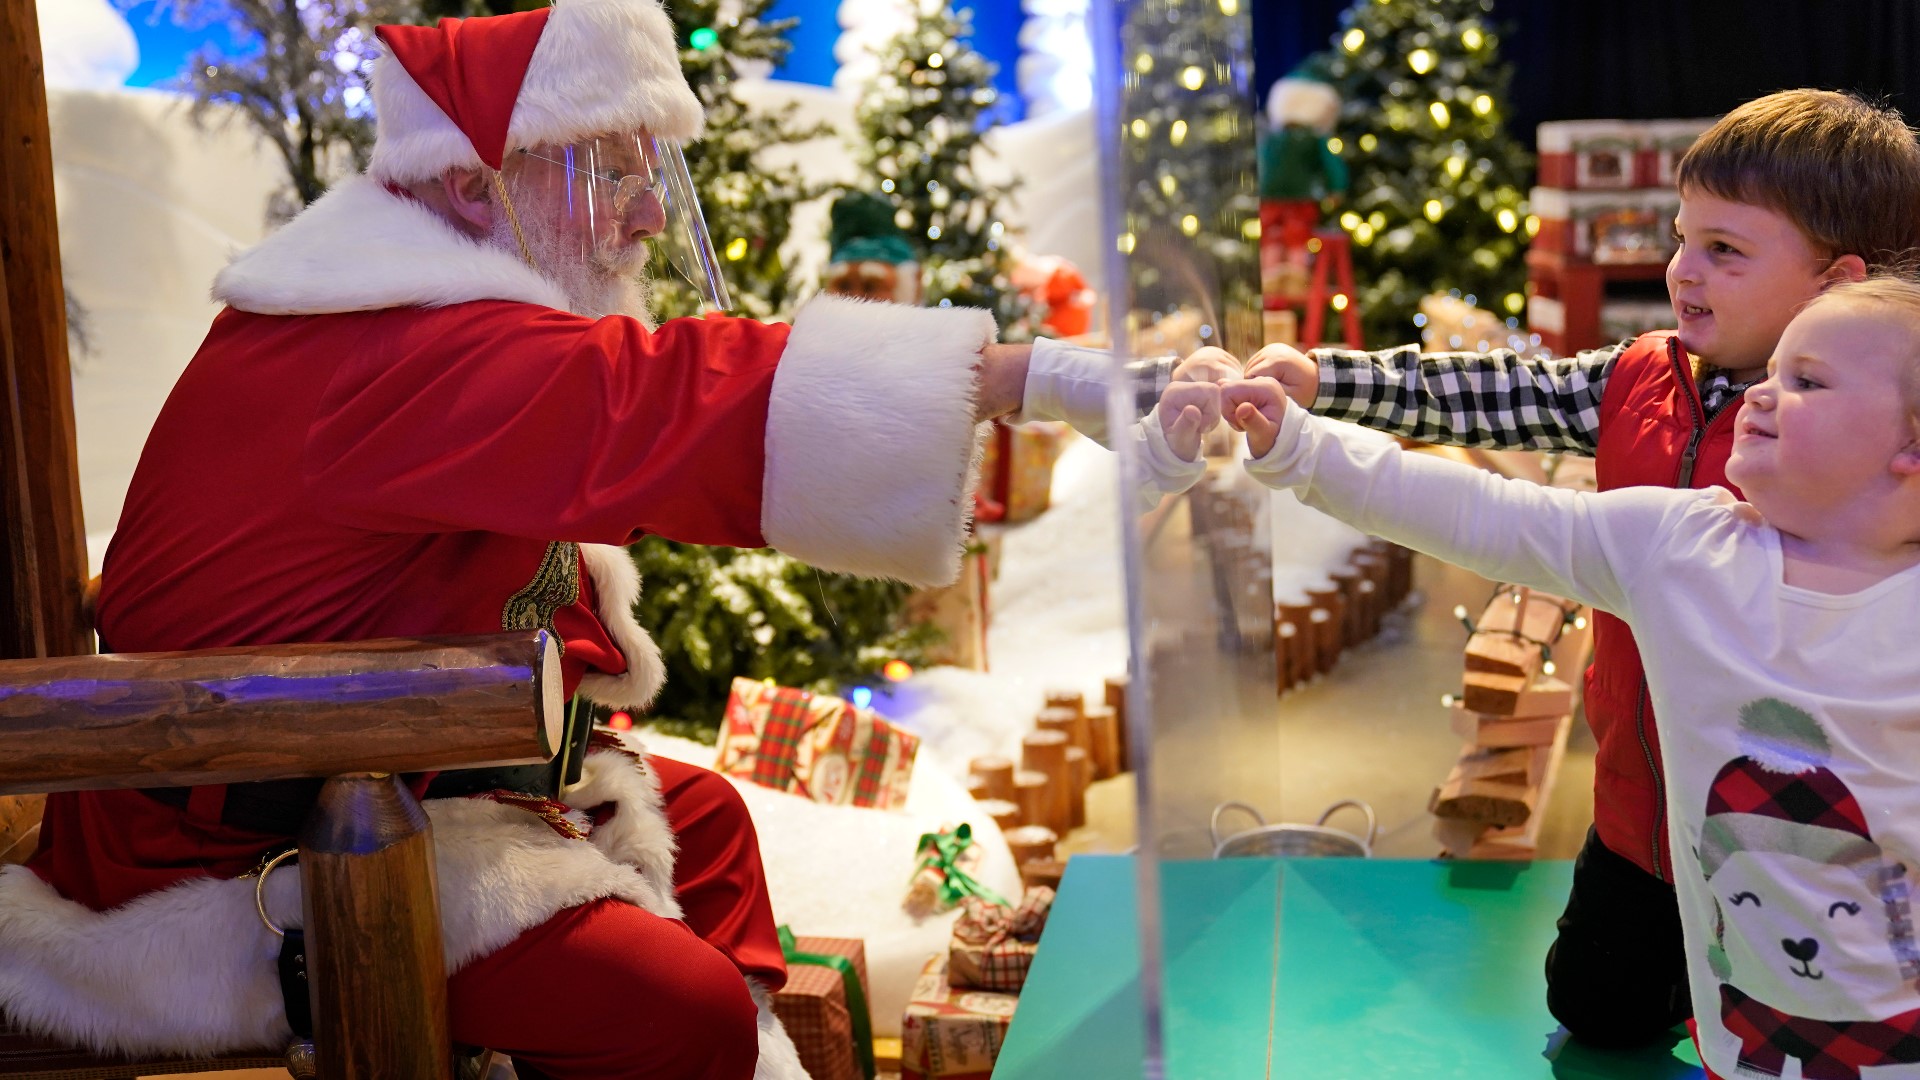 Santa's friends are a little harder to come by this holiday season, even as more families and friends plan to celebrate together for the first time in years.